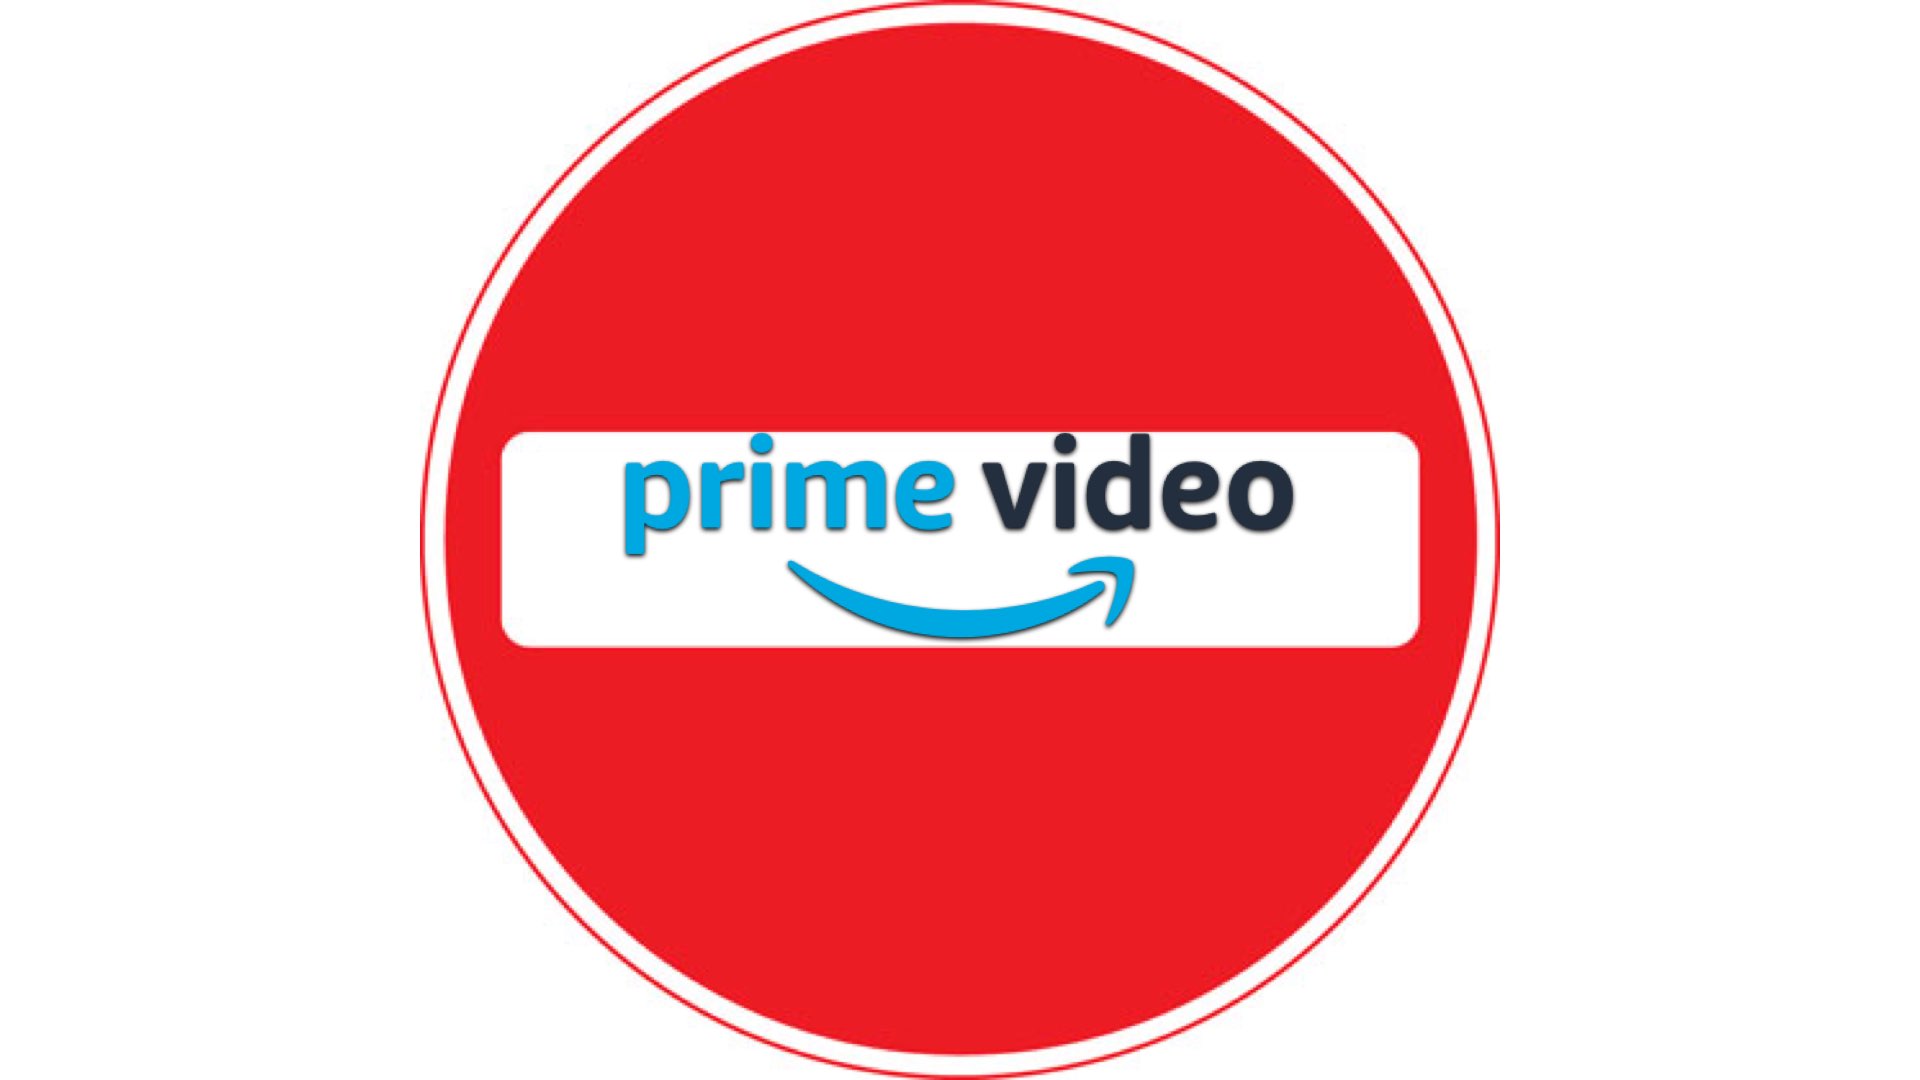 Amazon Prime Video Direct has Deleted Thousands of Indie Films